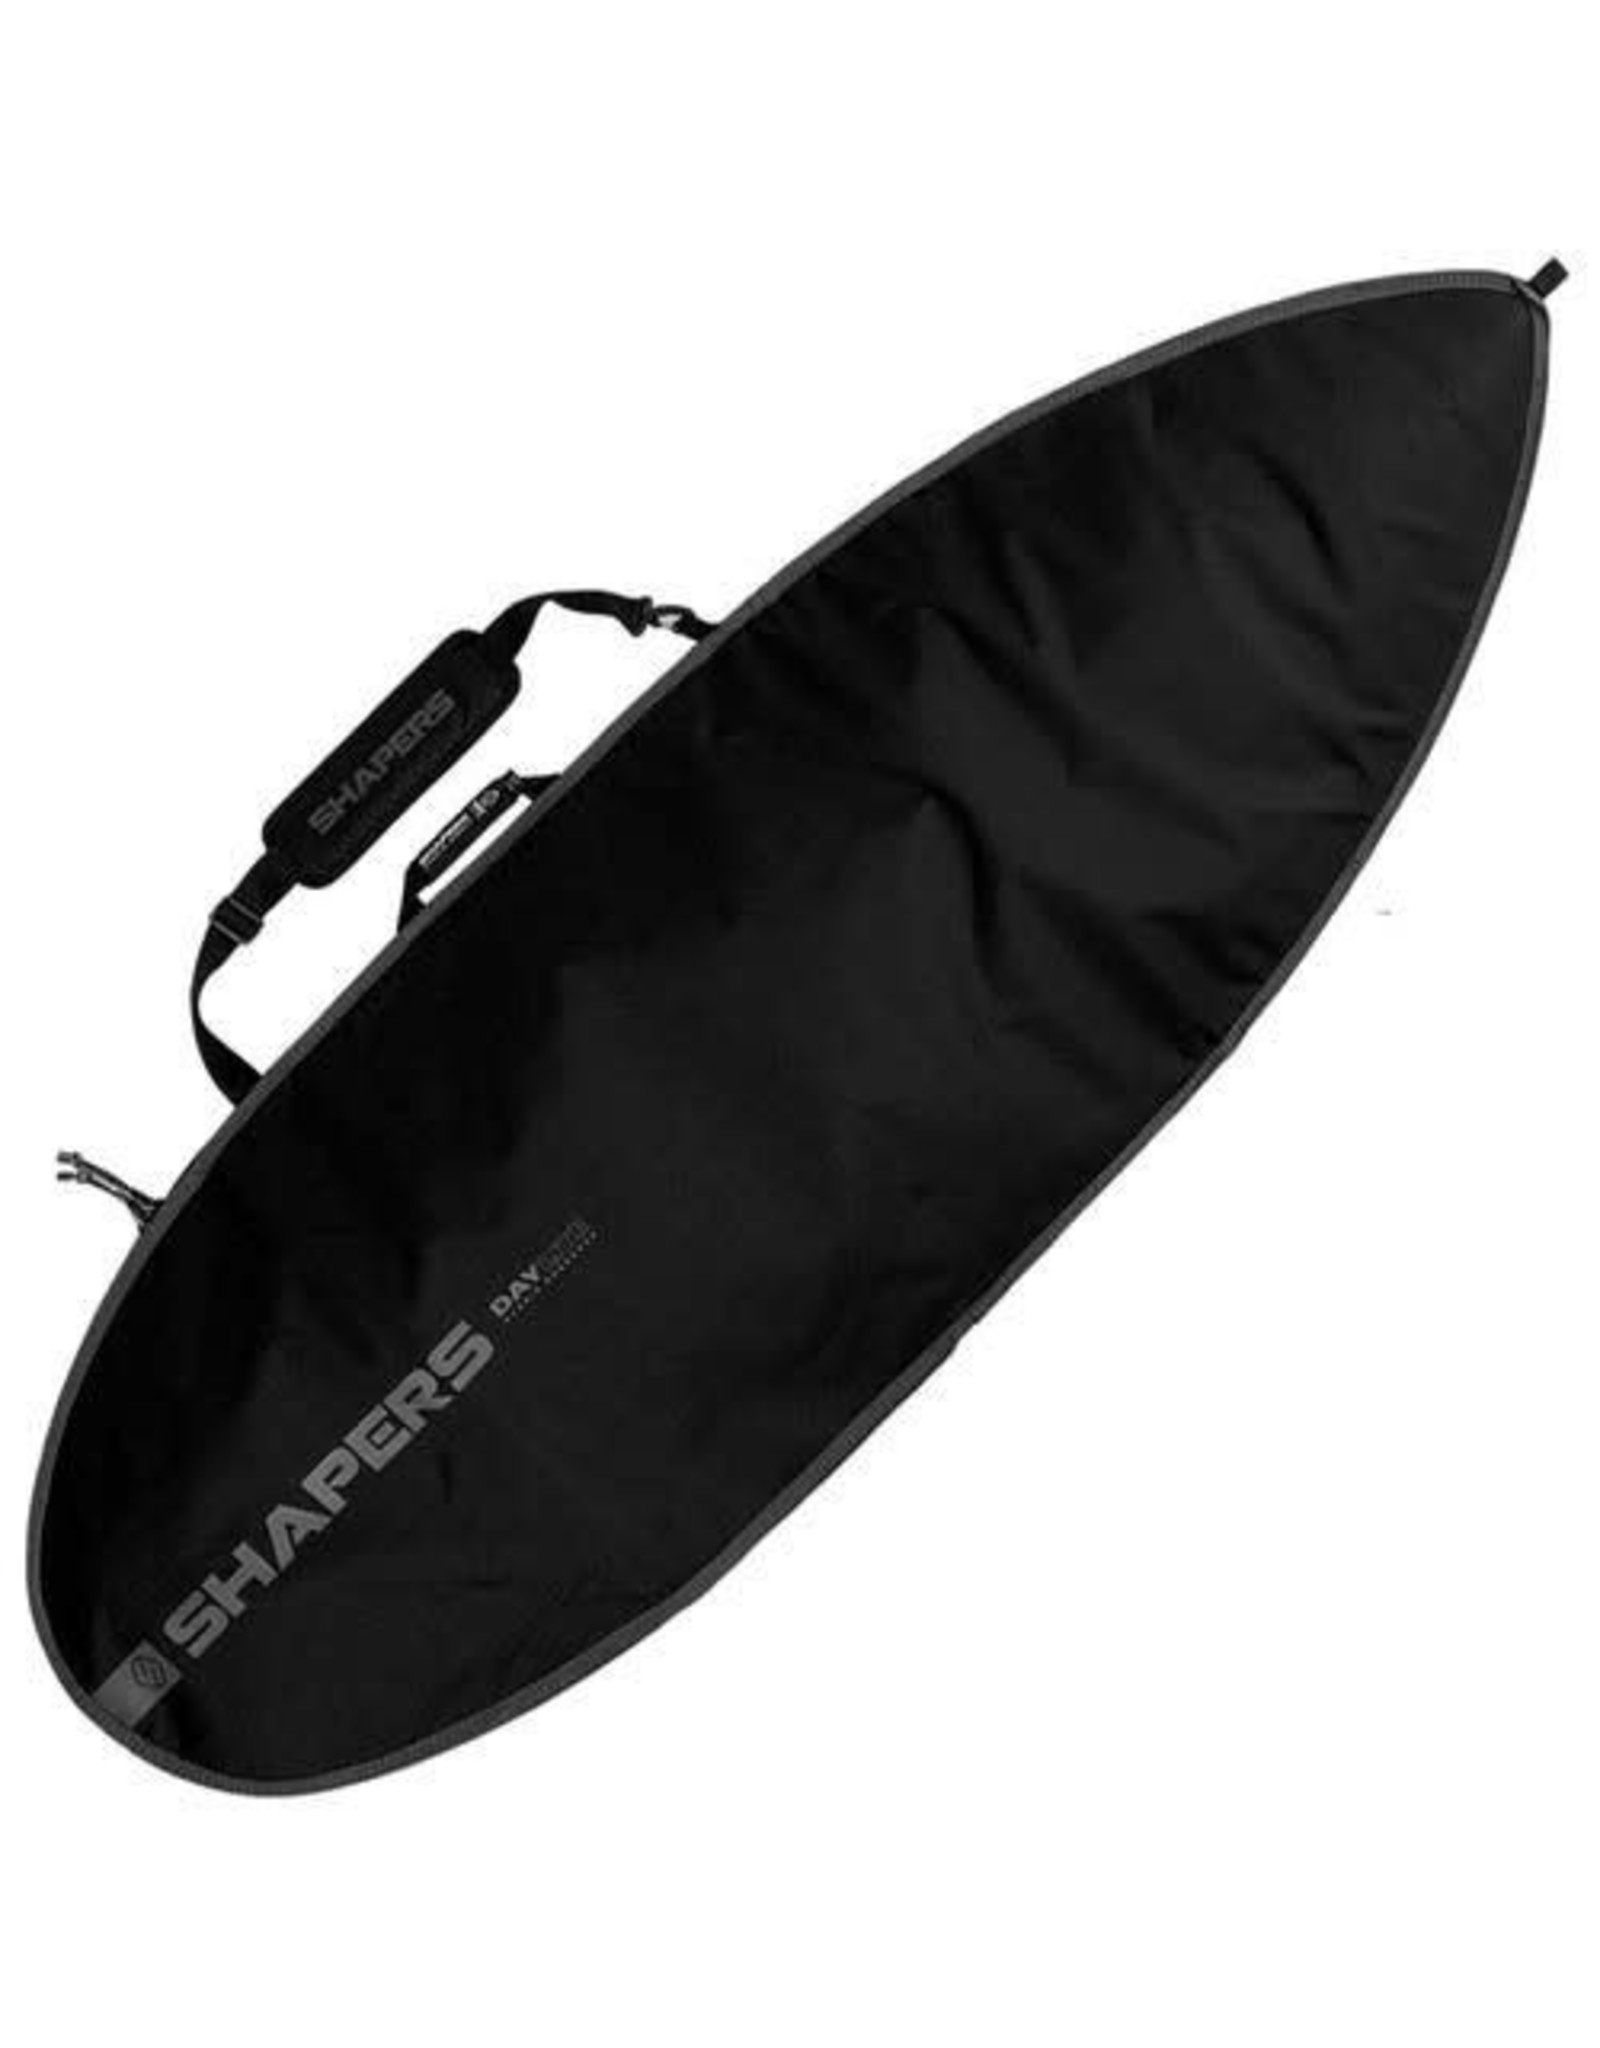 Shapers Shapers Daylite Shortboard Cover 5'8"